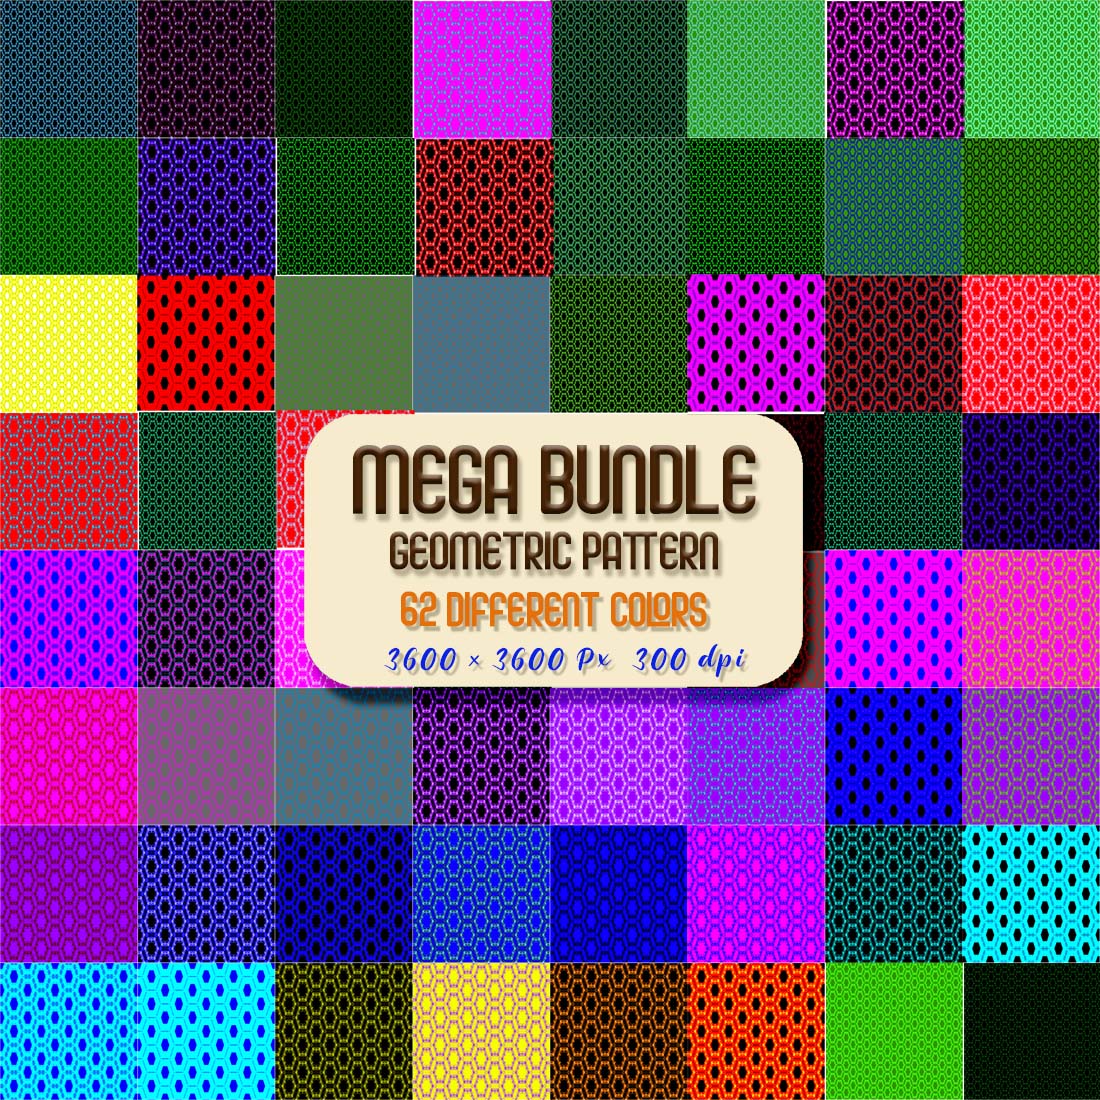 Geometric Seamless pattern mega bundle with high resolution preview image.